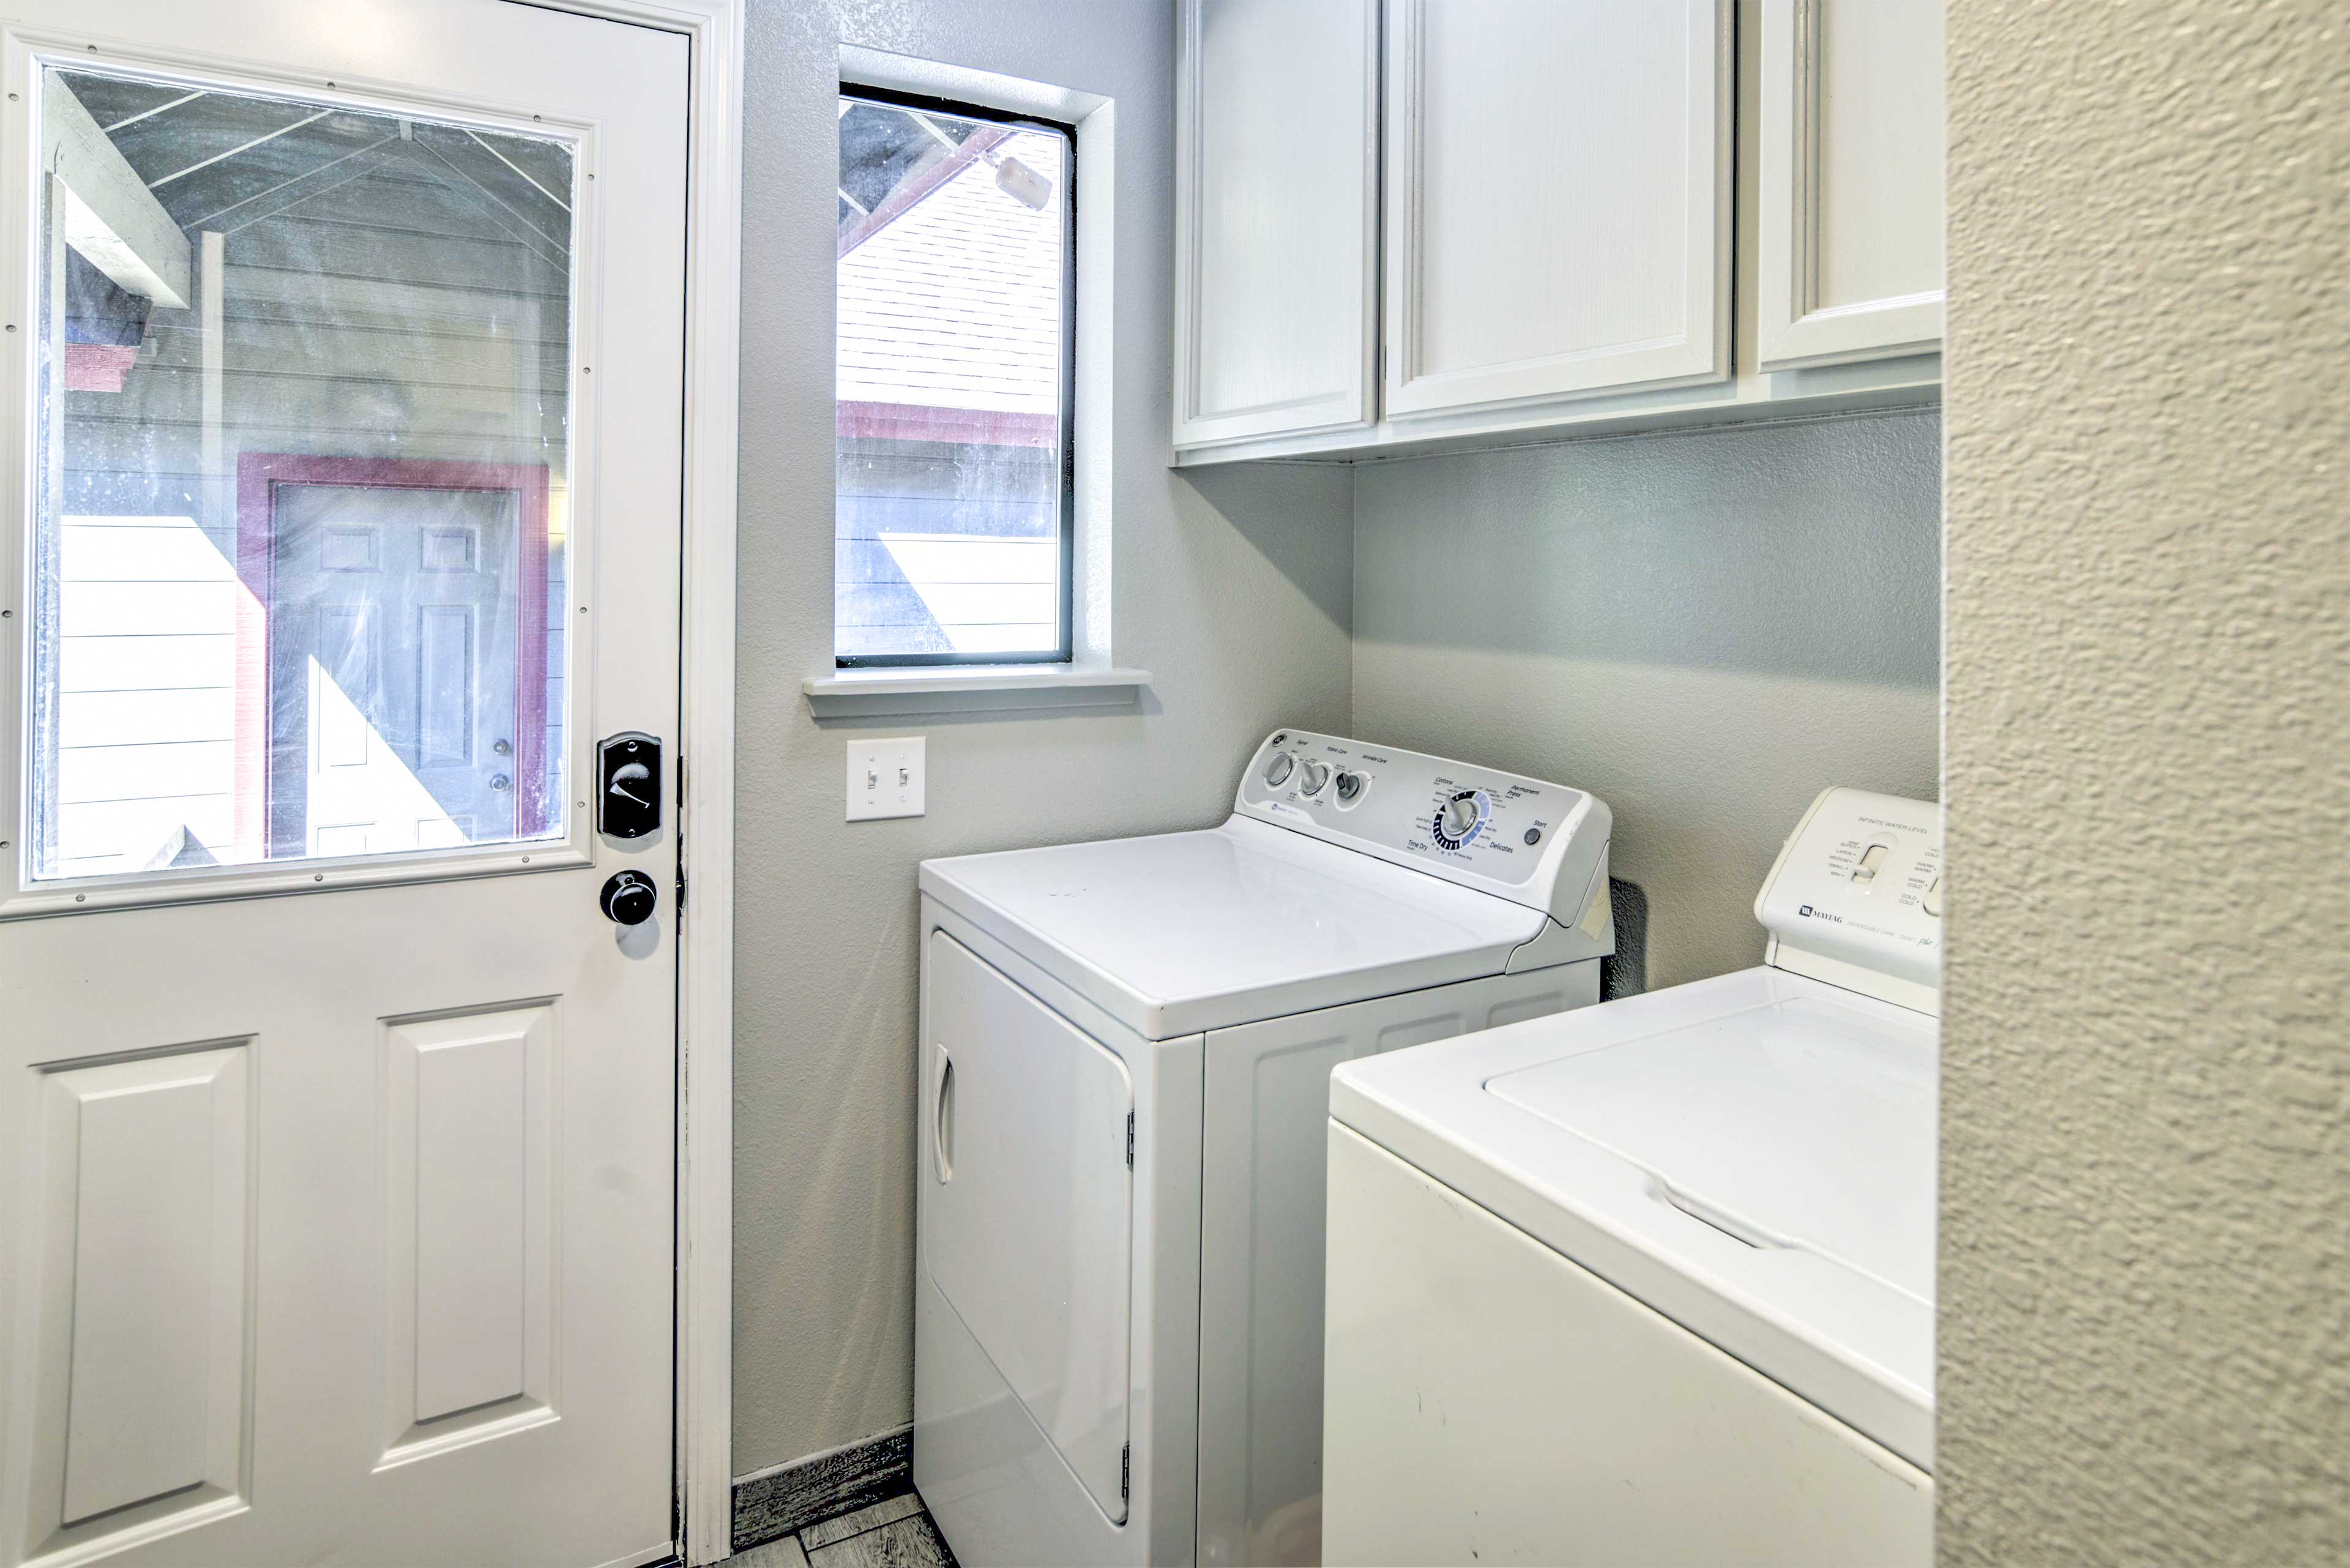 Laundry Room | Washer/Dryer | Iron/Board | Trash Bags/Paper Towels